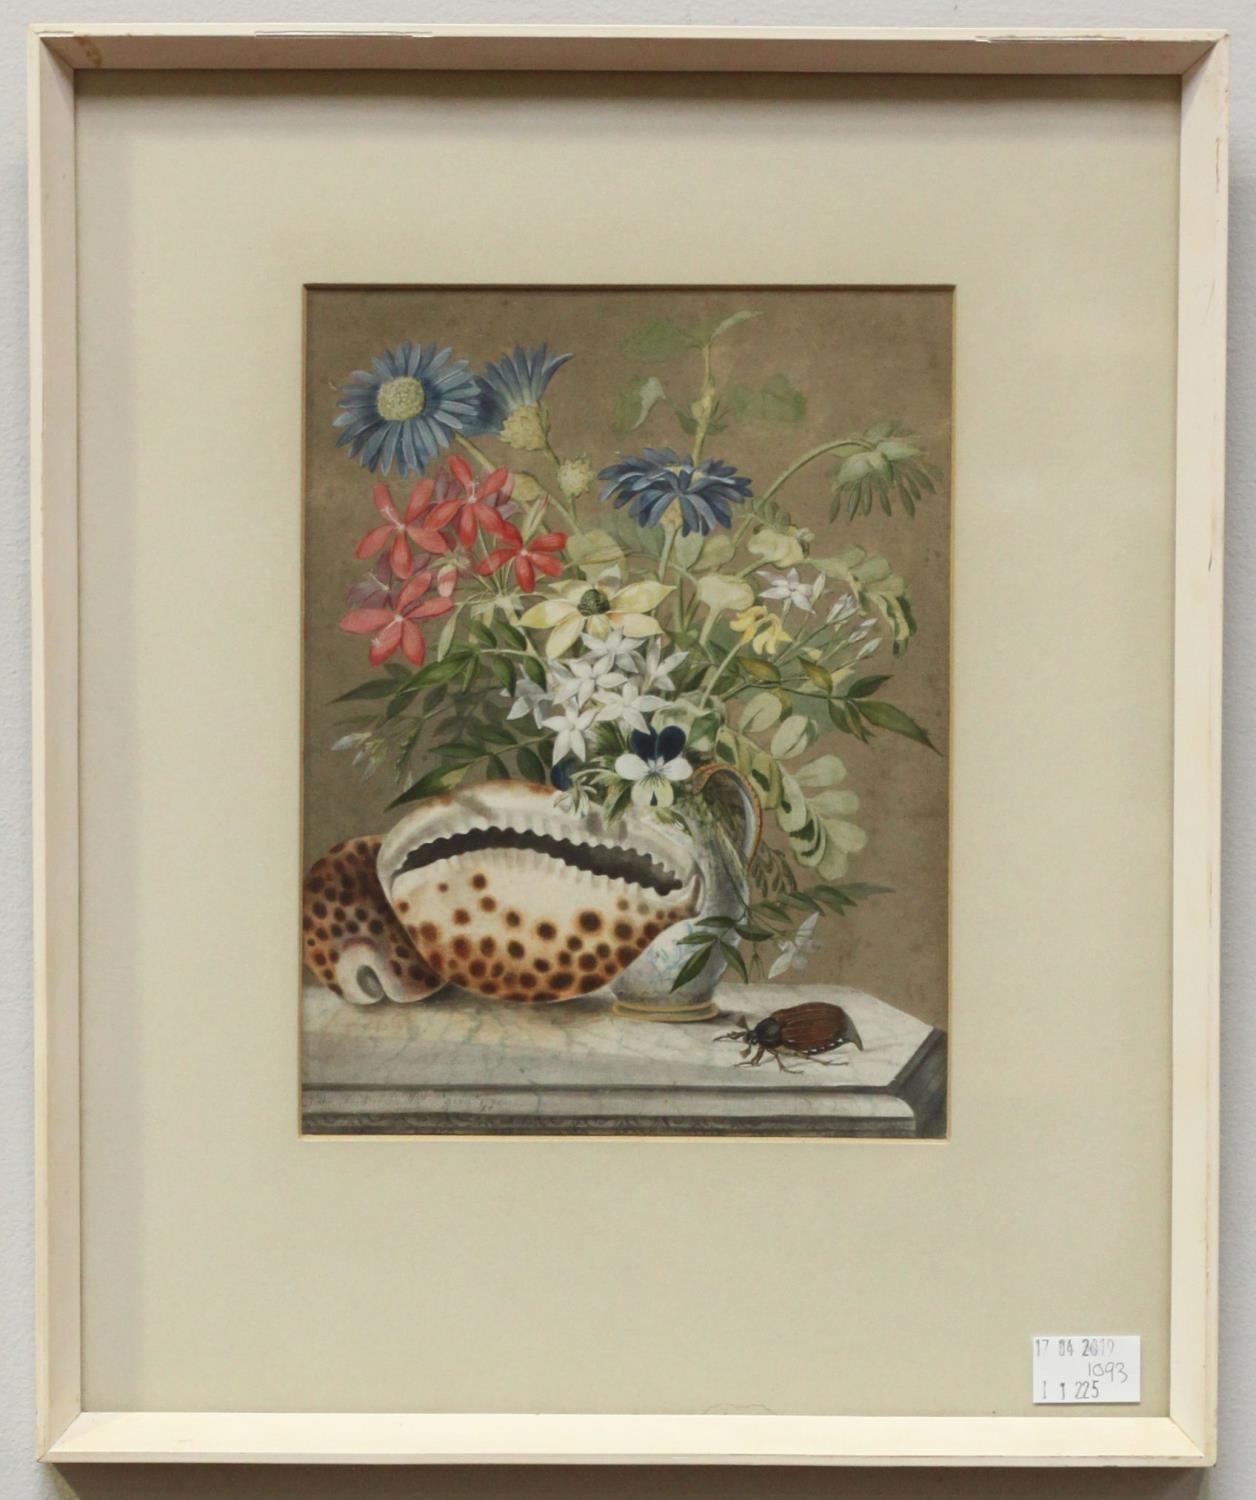 A still life study of flowers, shells and a stag beetle, watercolour, indistinctly signed John